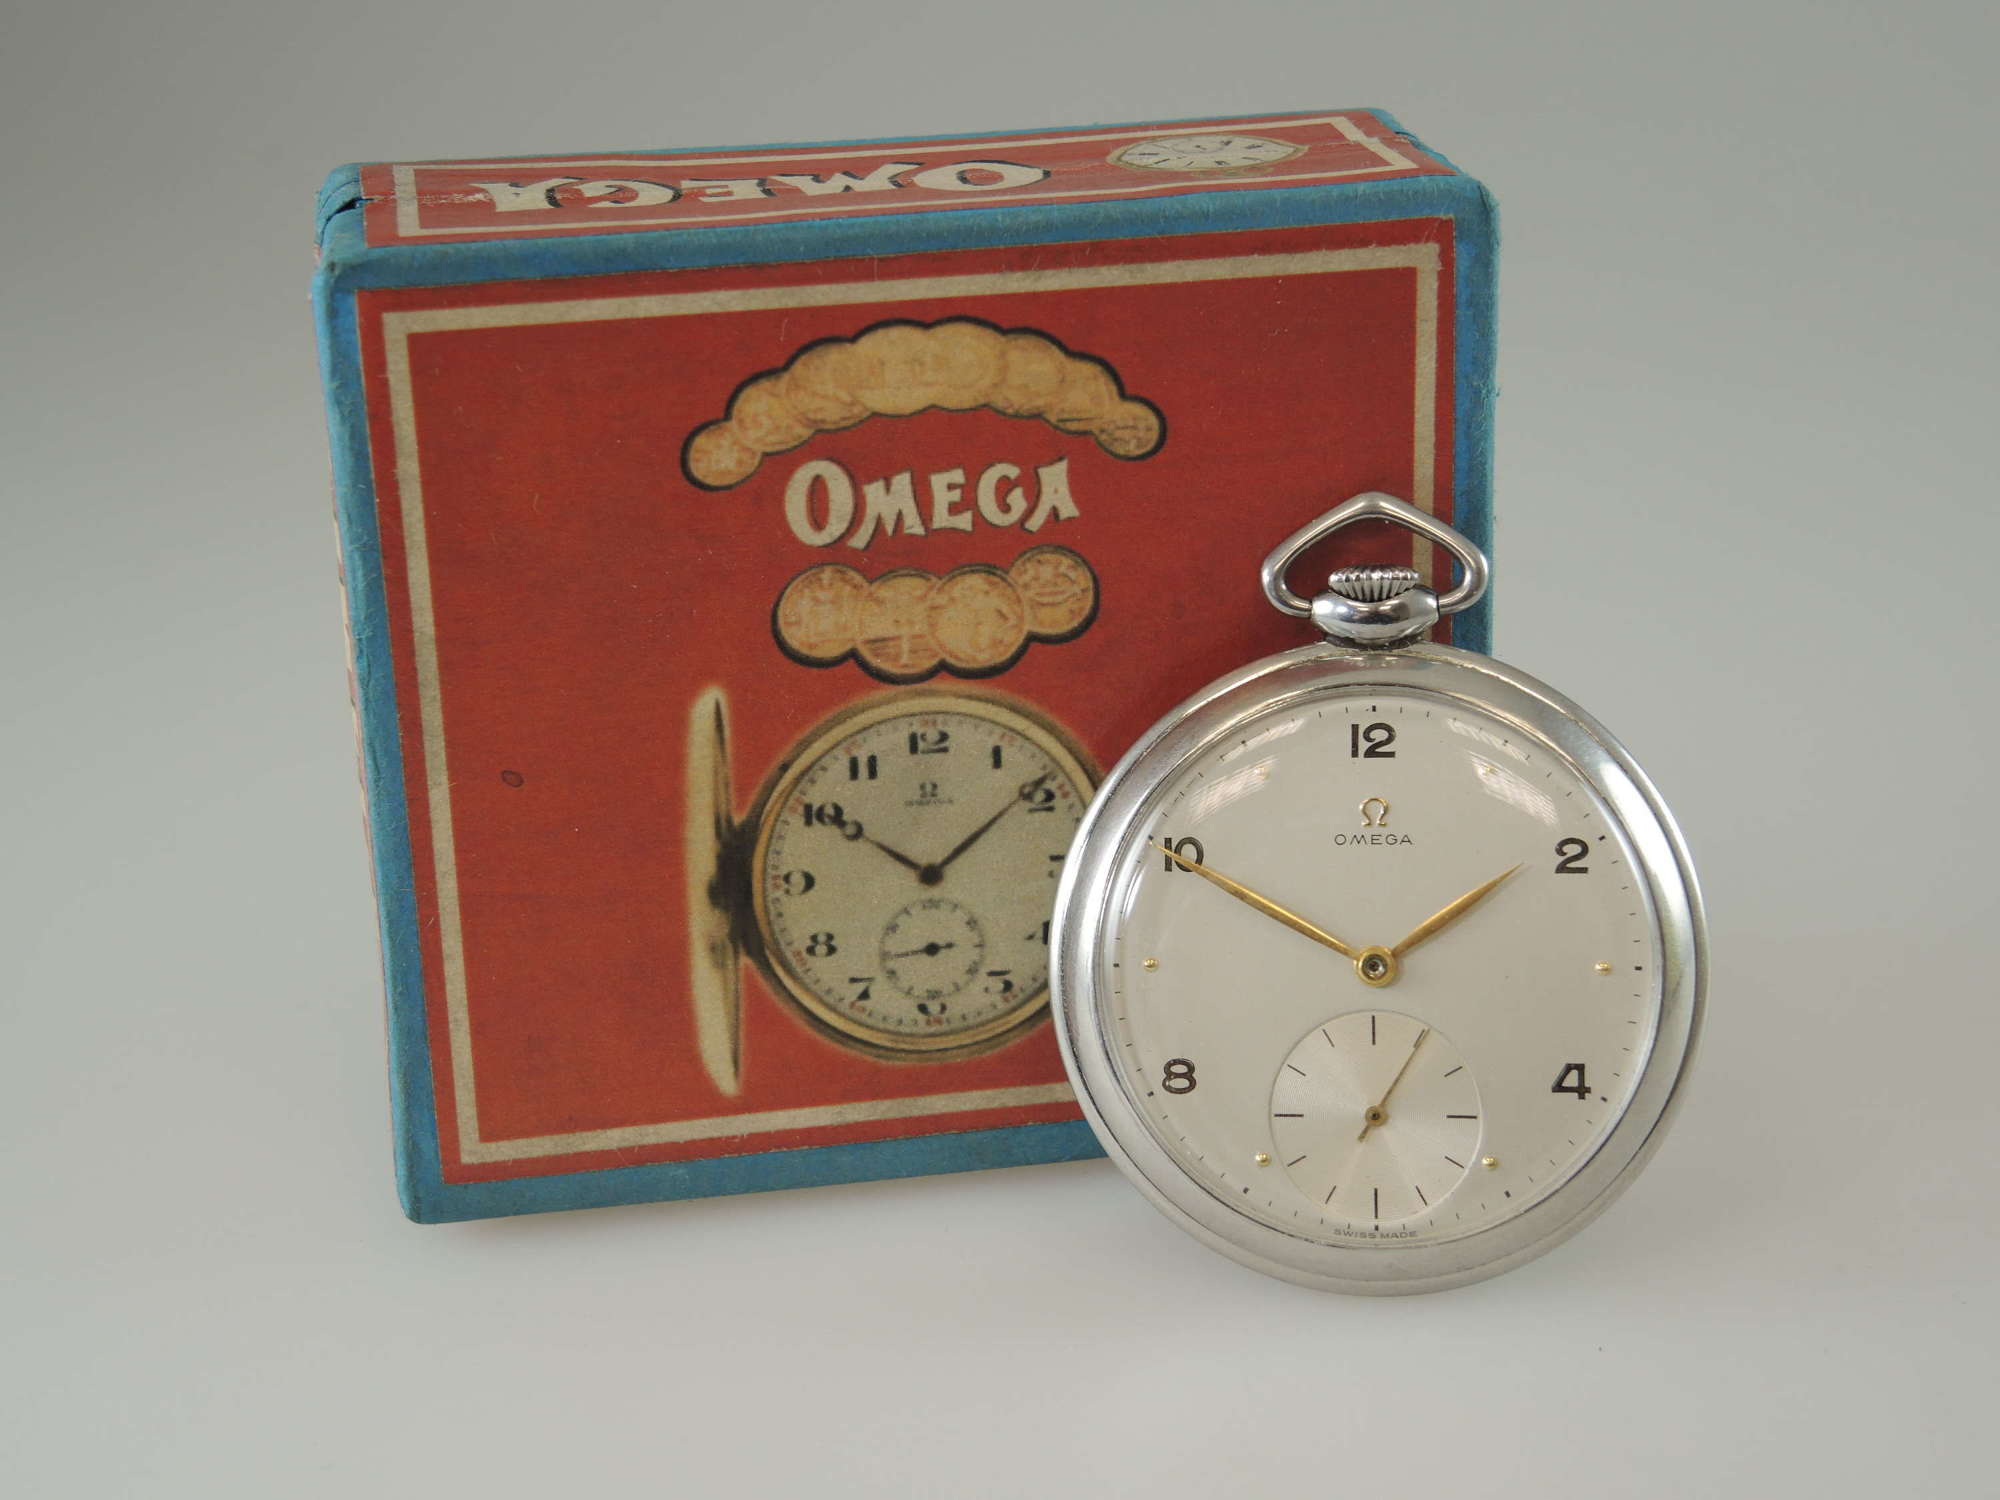 Vintage Omega pocket watch. With Box. c1956